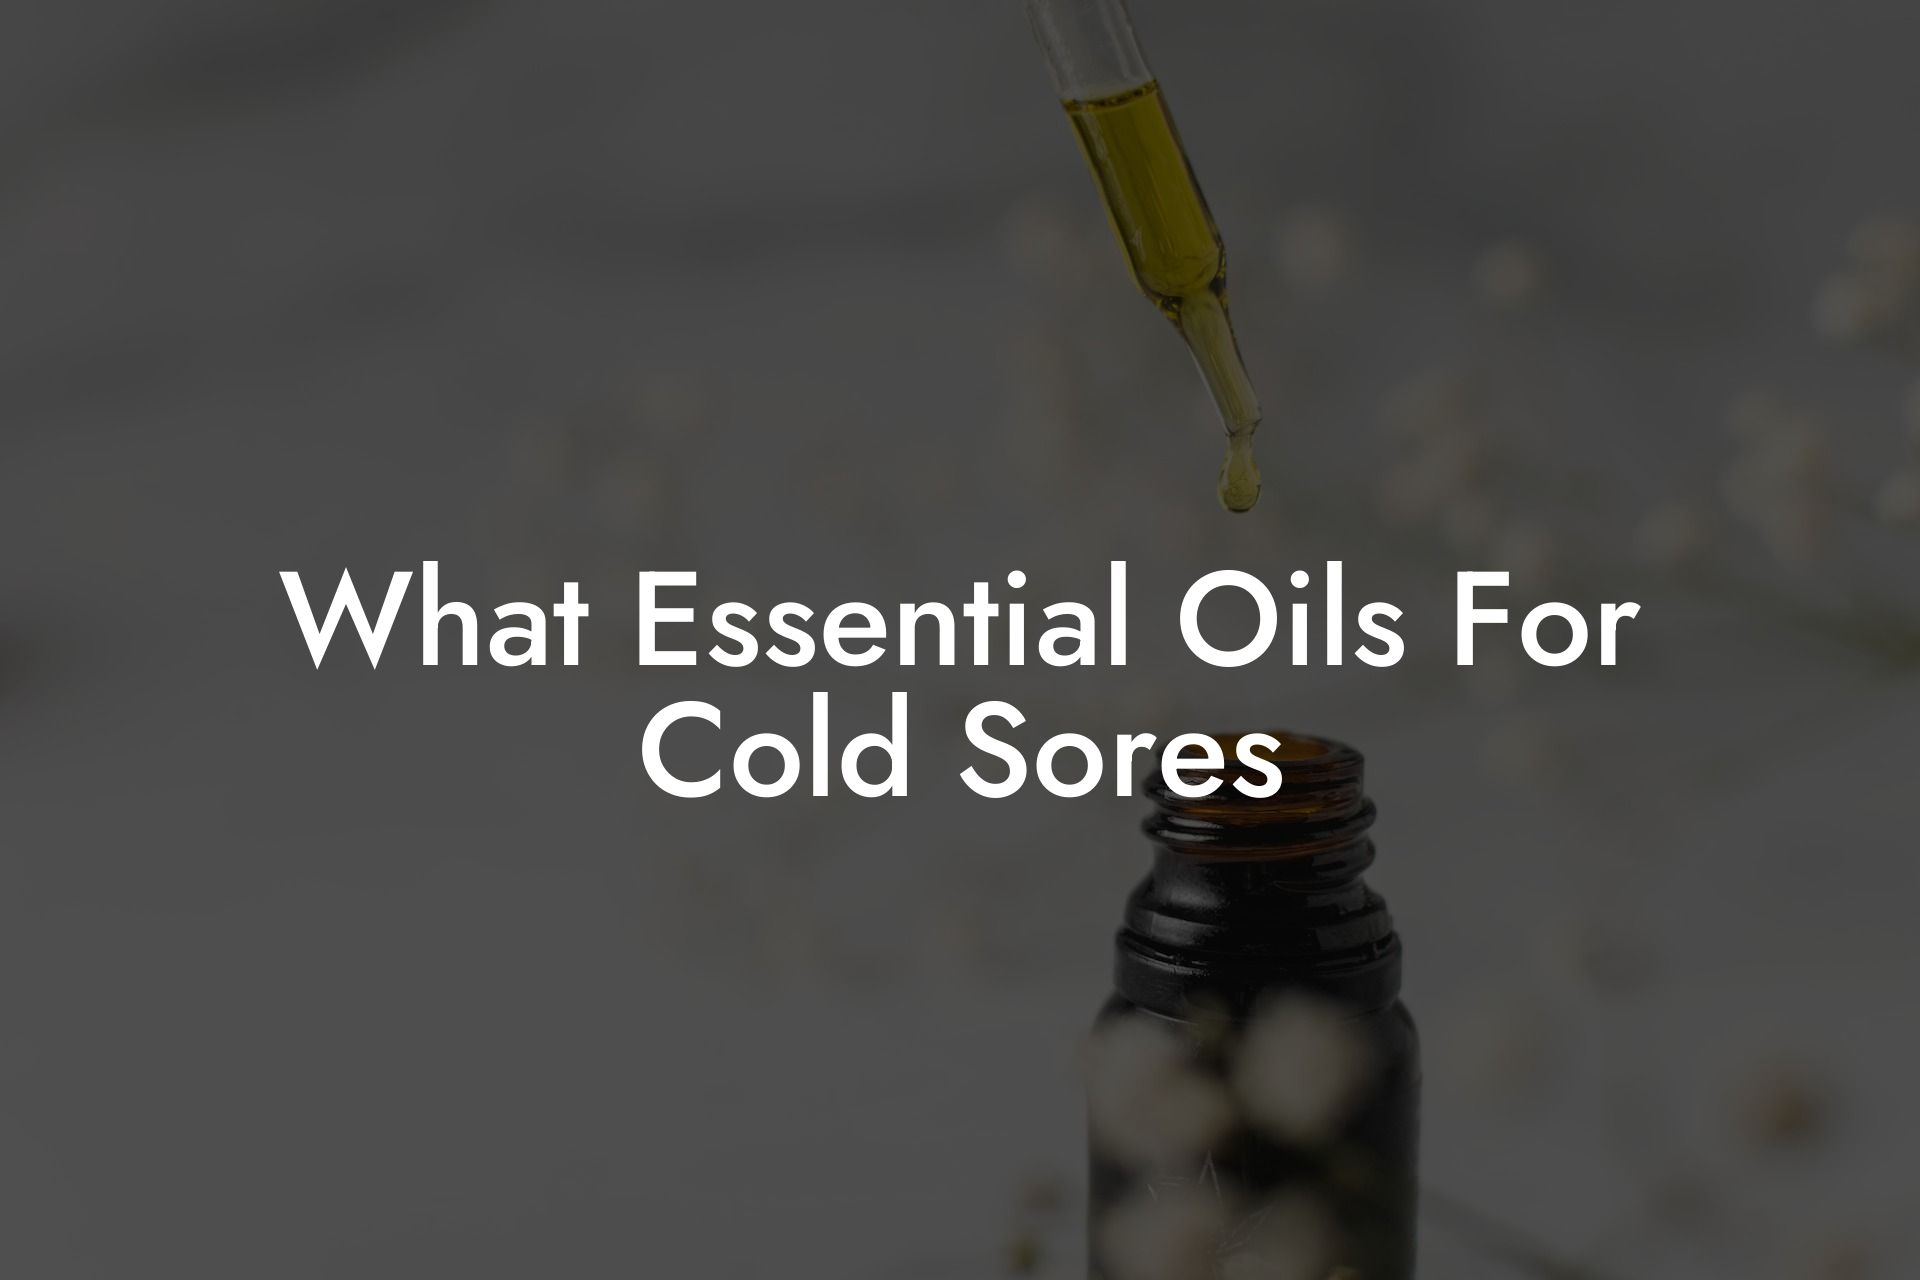 What Essential Oils For Cold Sores